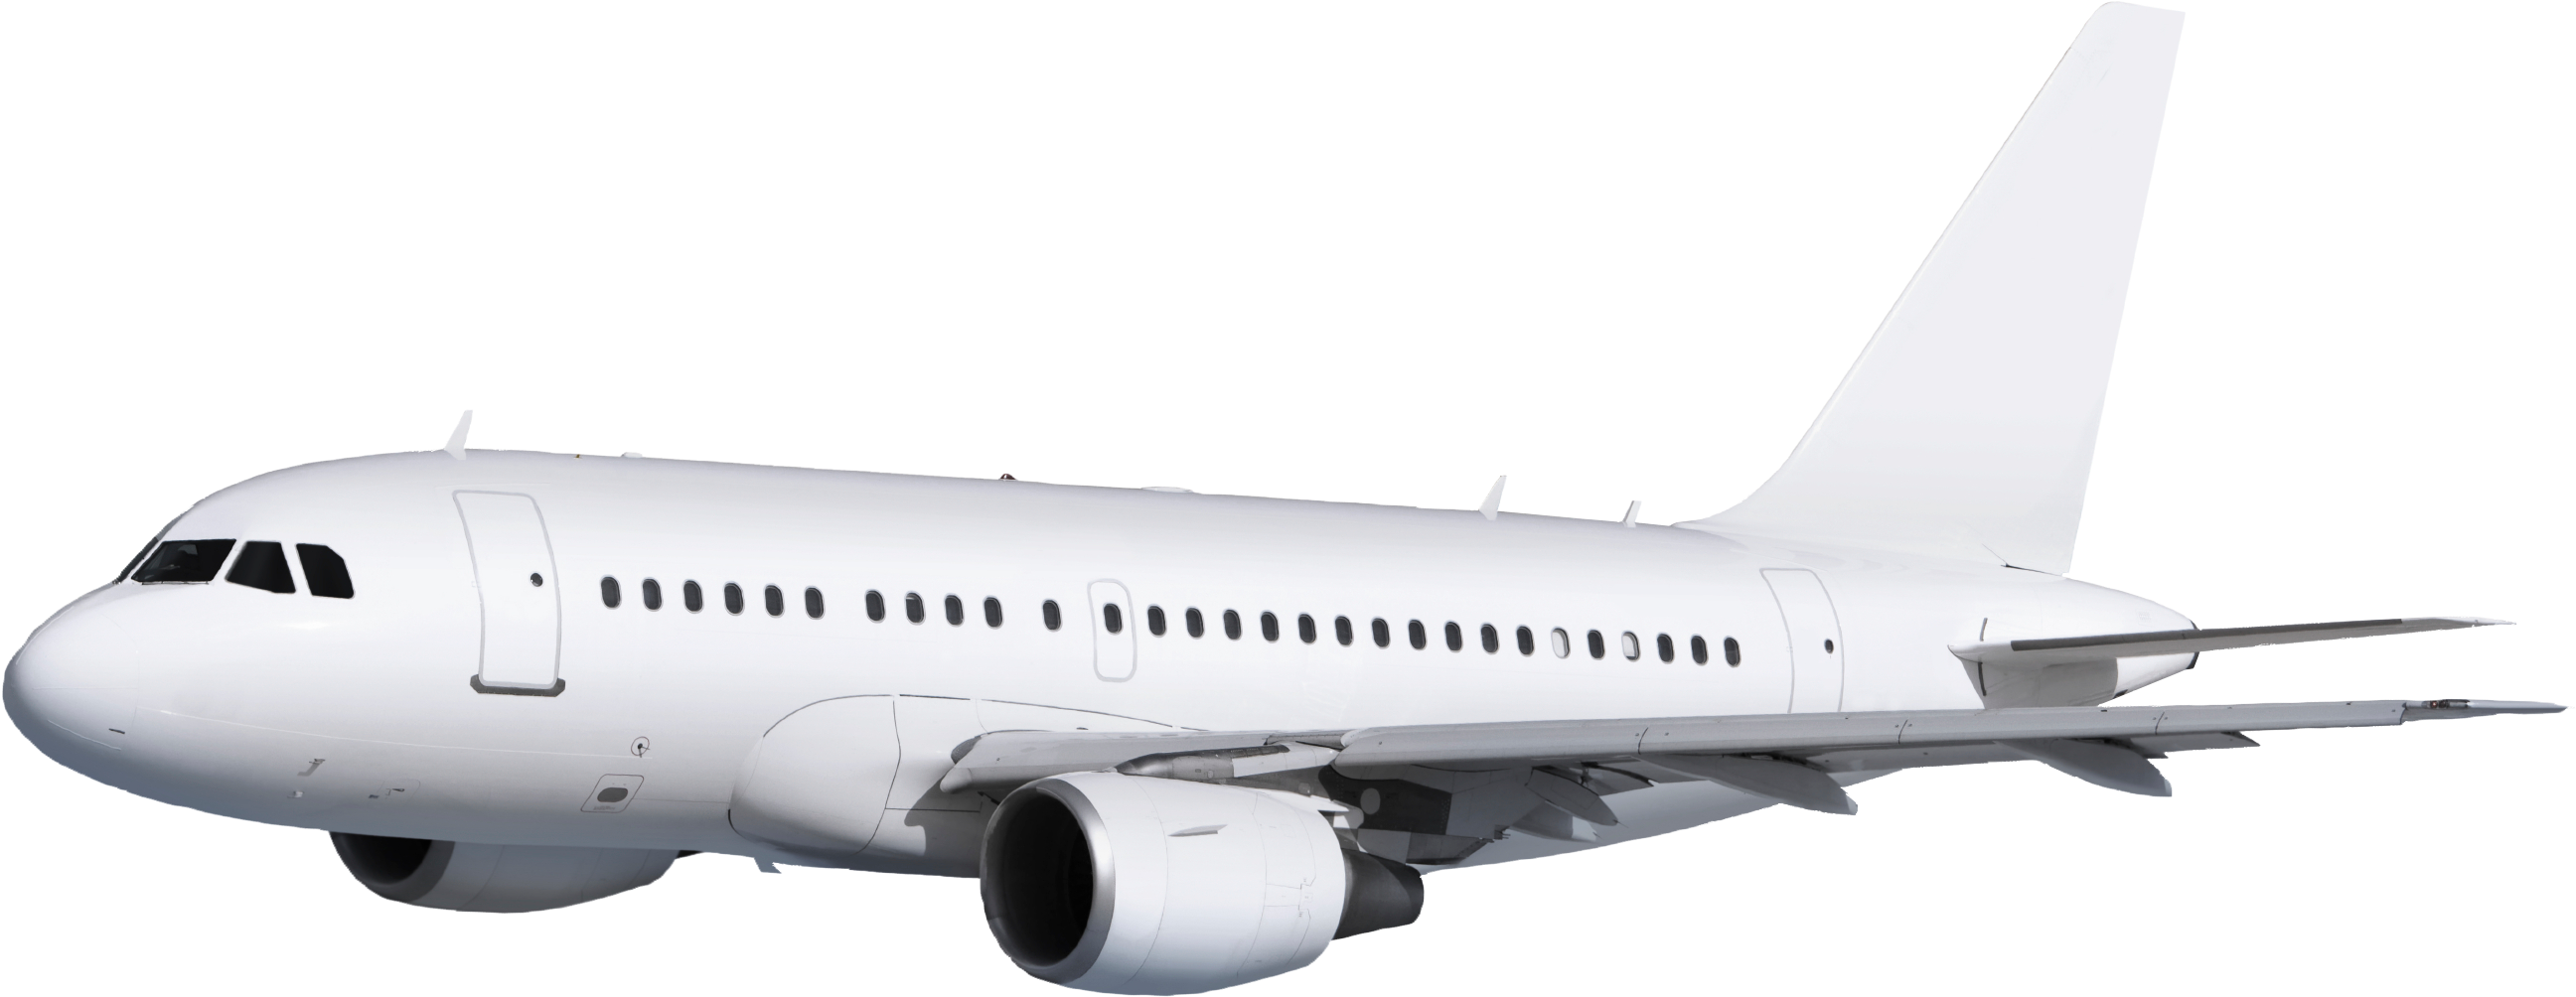 Aeroplane Png Images Transparent Background Png Play